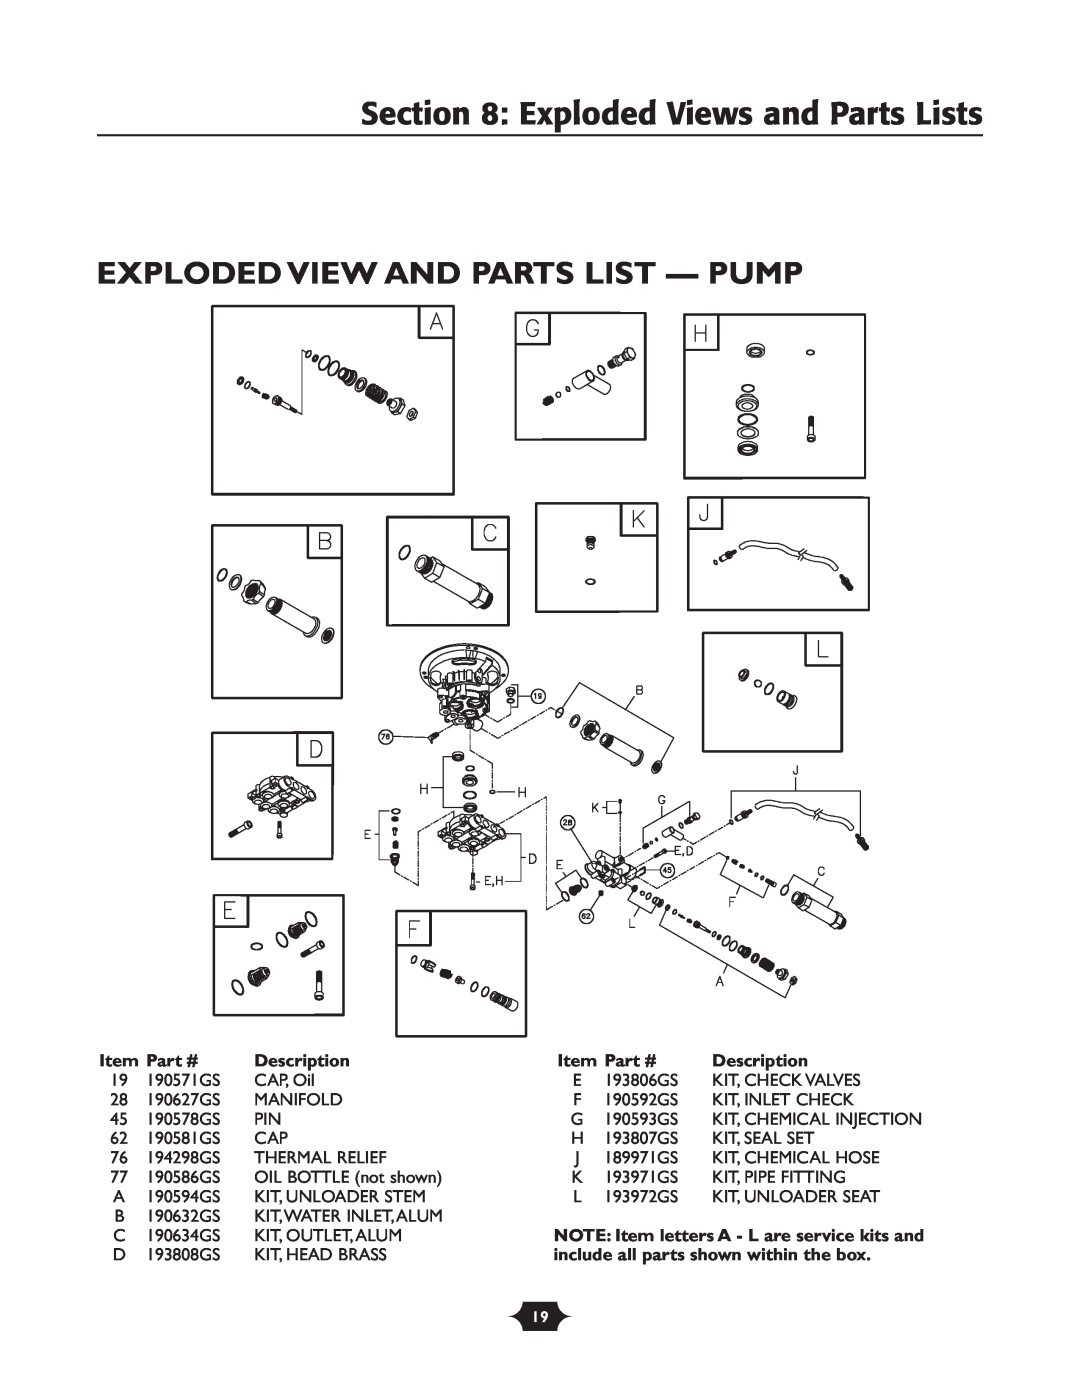 Troy-Bilt 20207 manual Exploded Views and Parts Lists, Exploded View And Parts List - Pump, Description 